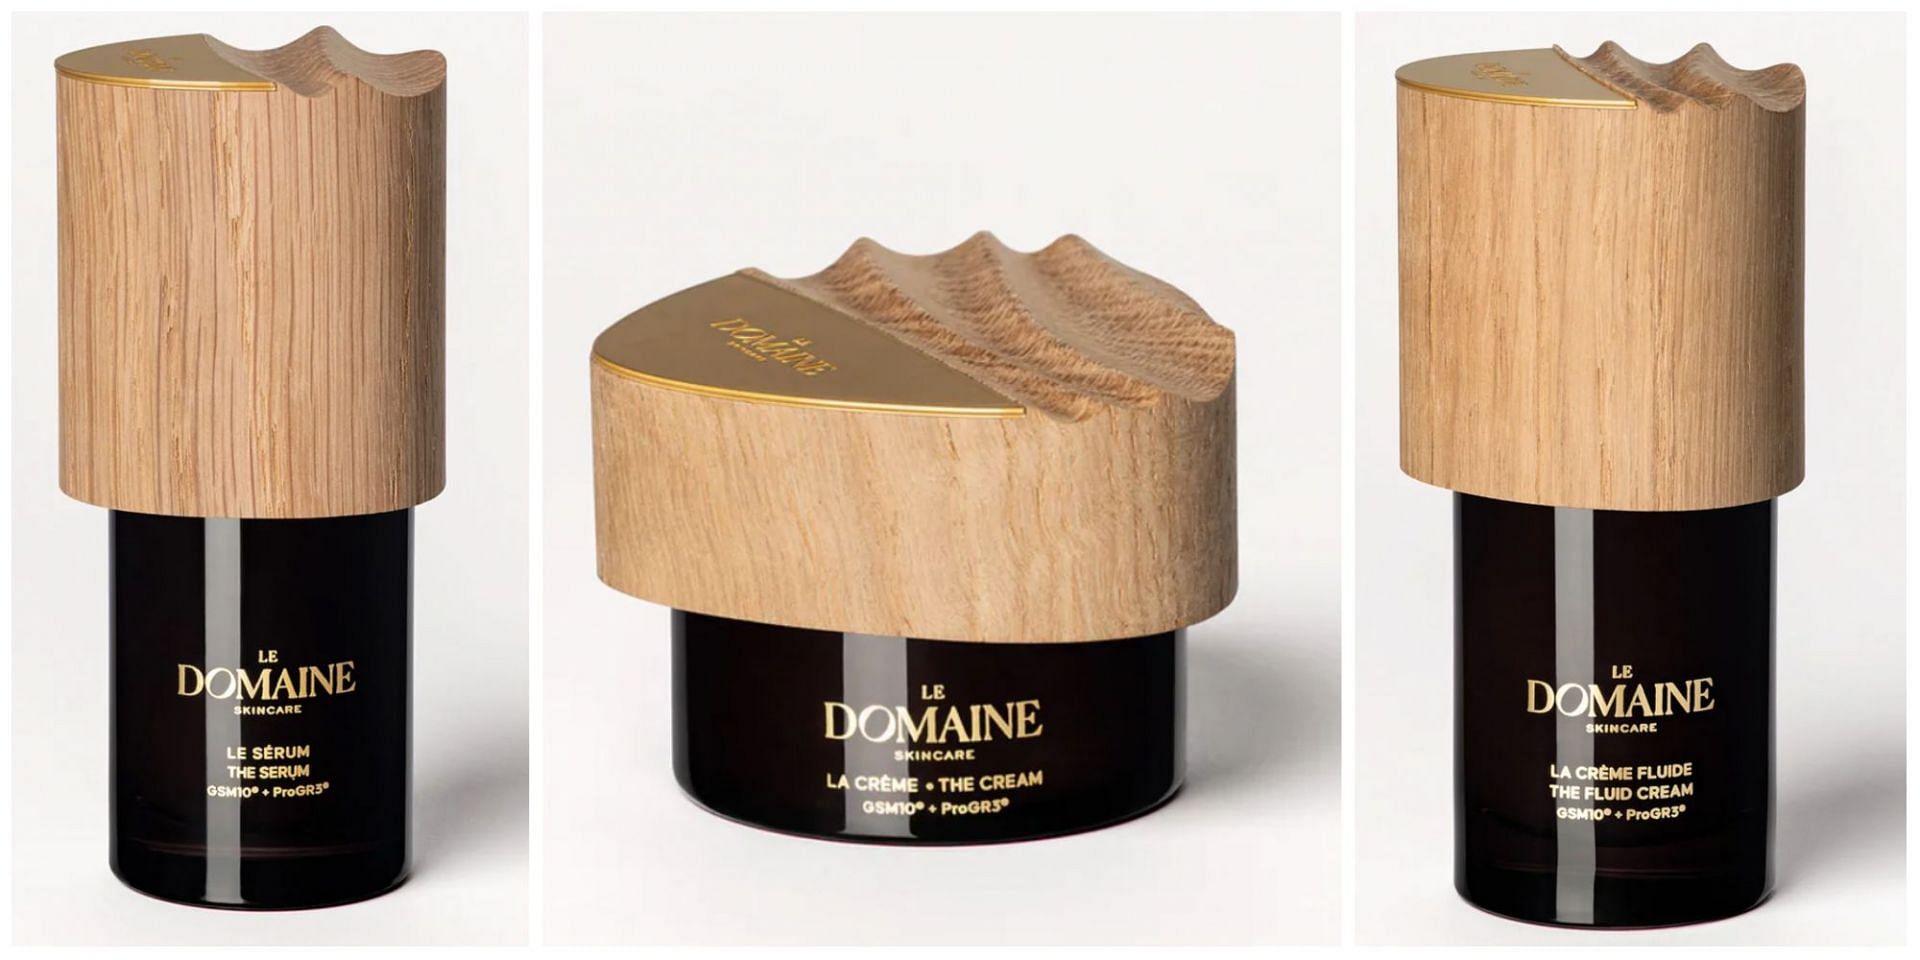 Brad Pitt&#039;s new line, Le Domaine, would be available on the official website. (Image via Le Domaine)